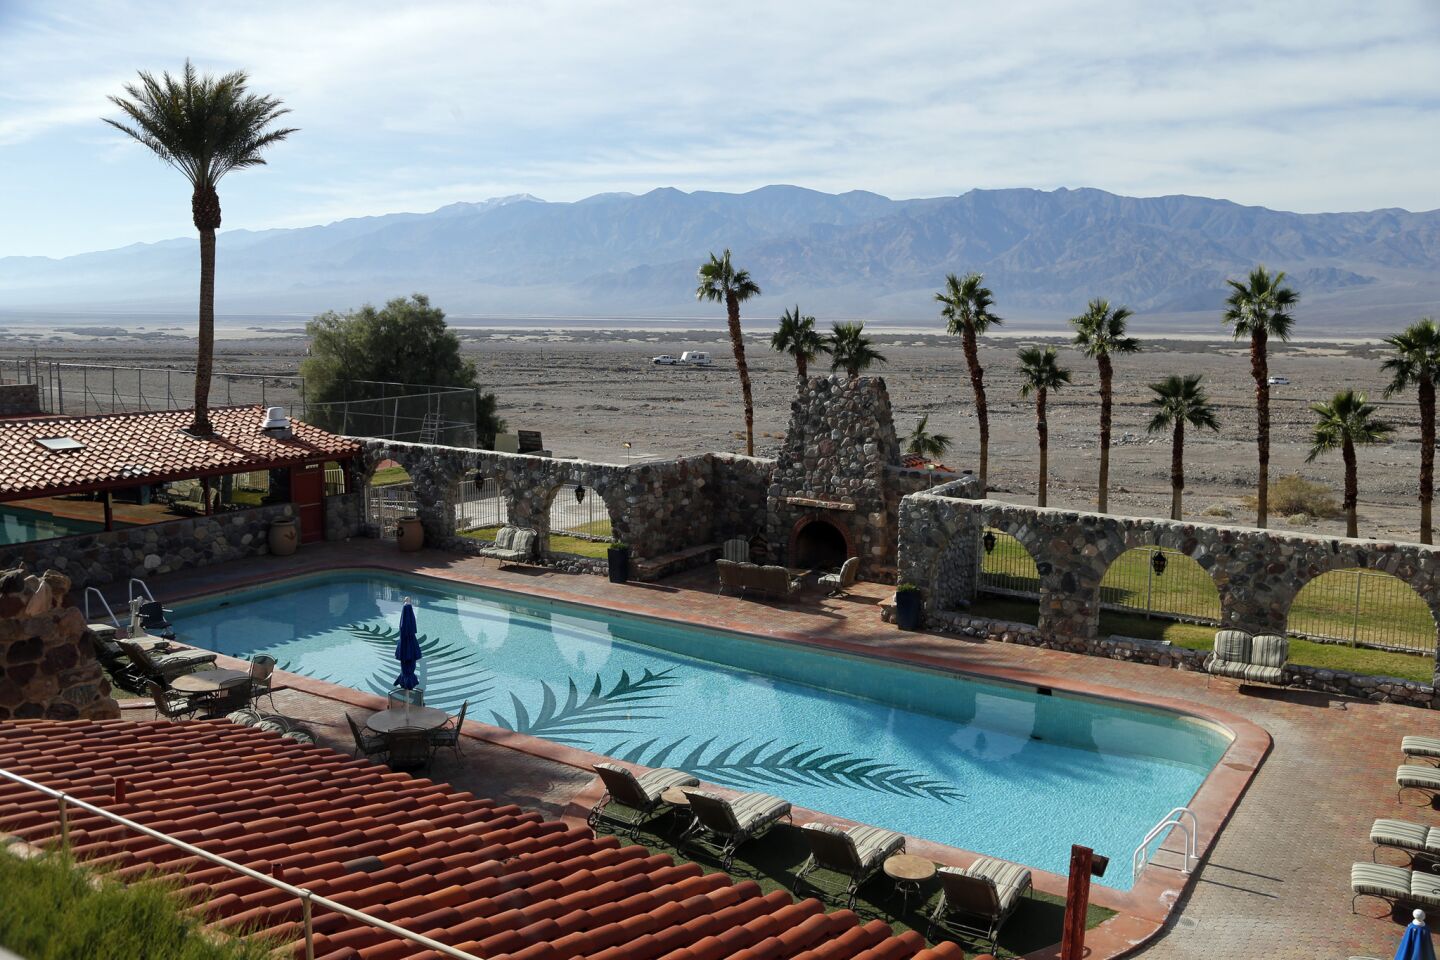 The Inn at Furnace Creek offers higher-end lodging and dining with a view of the park.